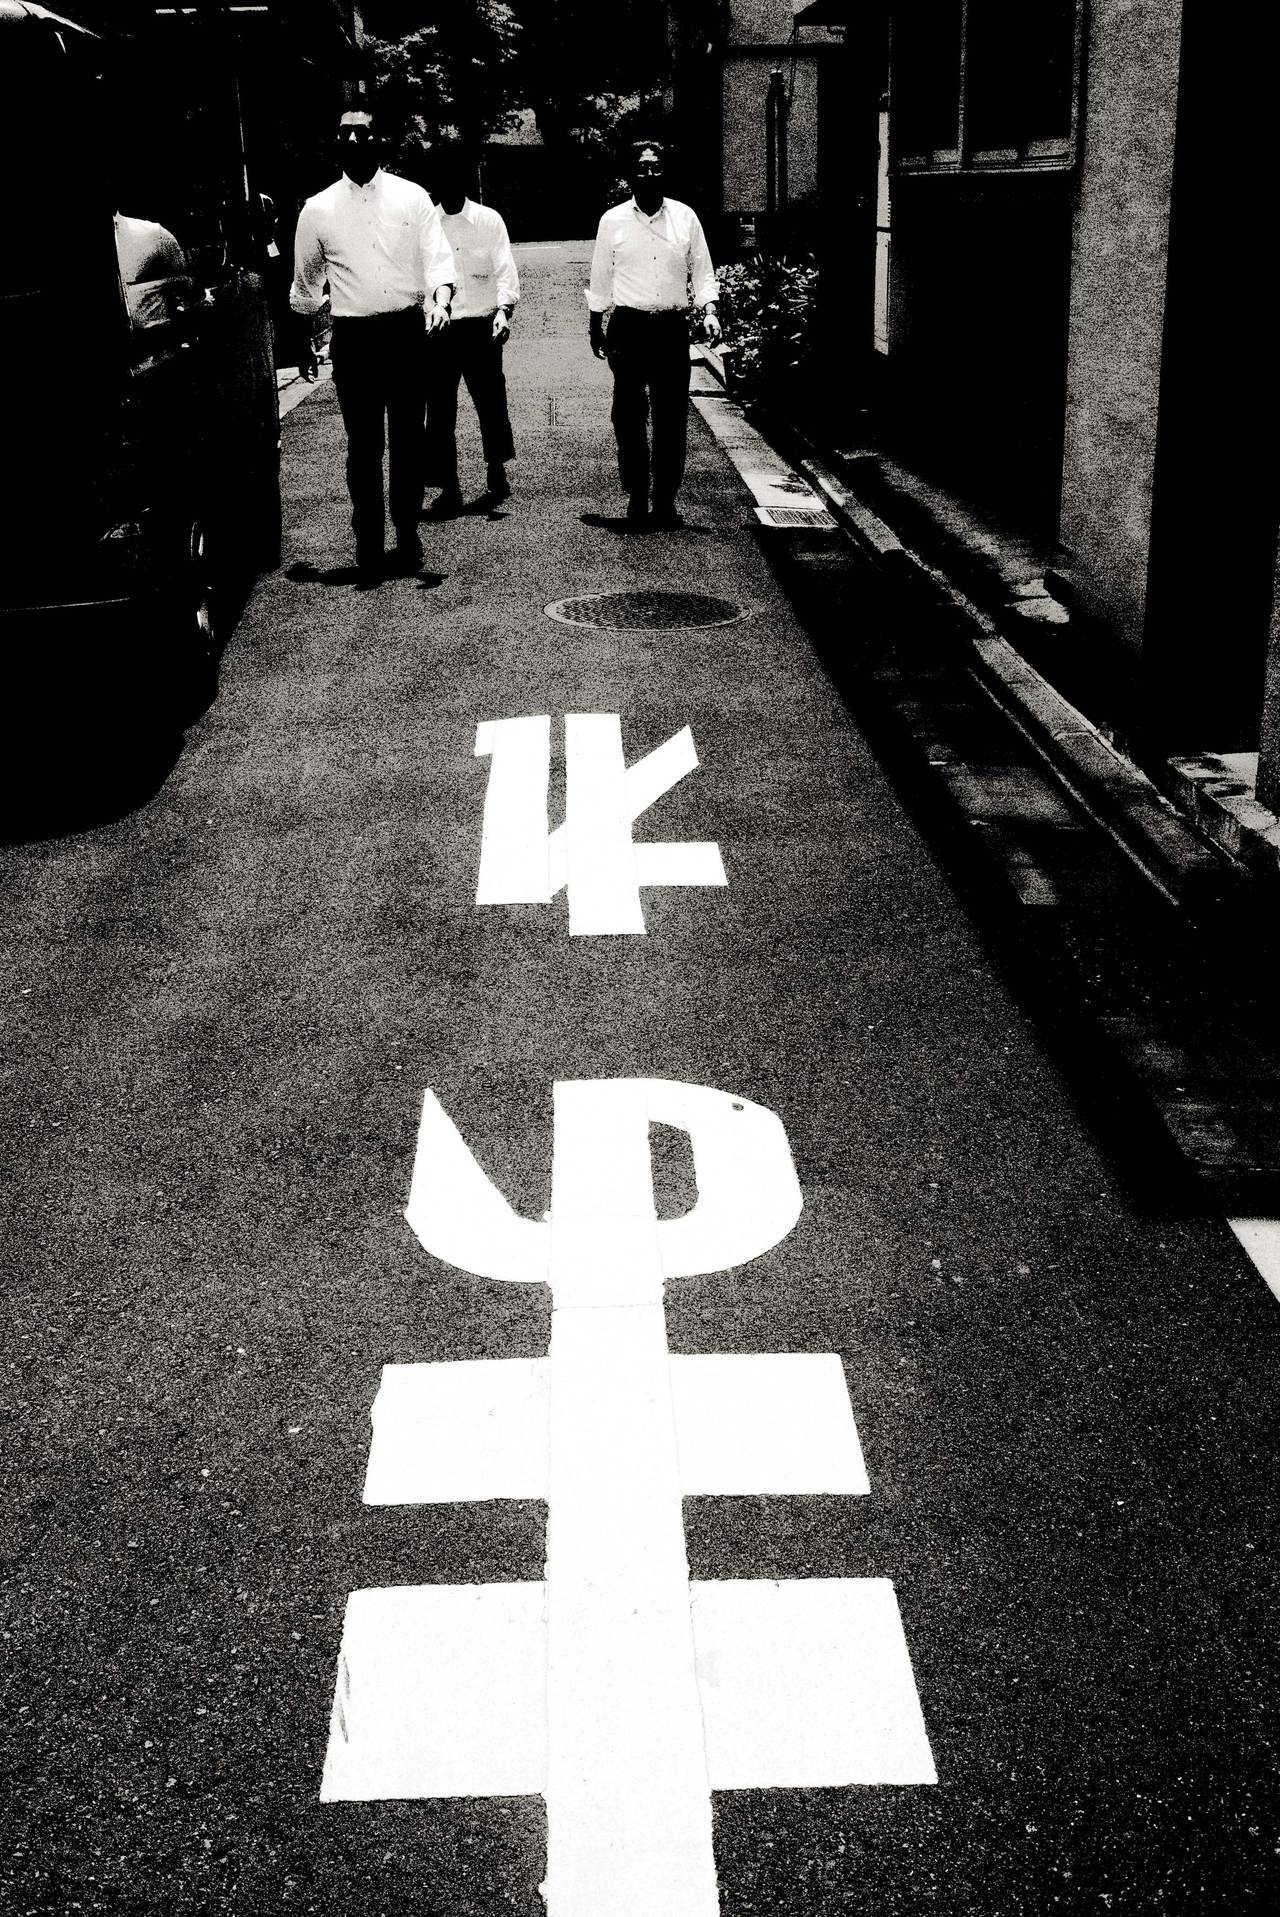 Andreas H. Bitesnich Still-Life Photograph - Three men walking, Tokyo - on the streets in japan with signs painted on it